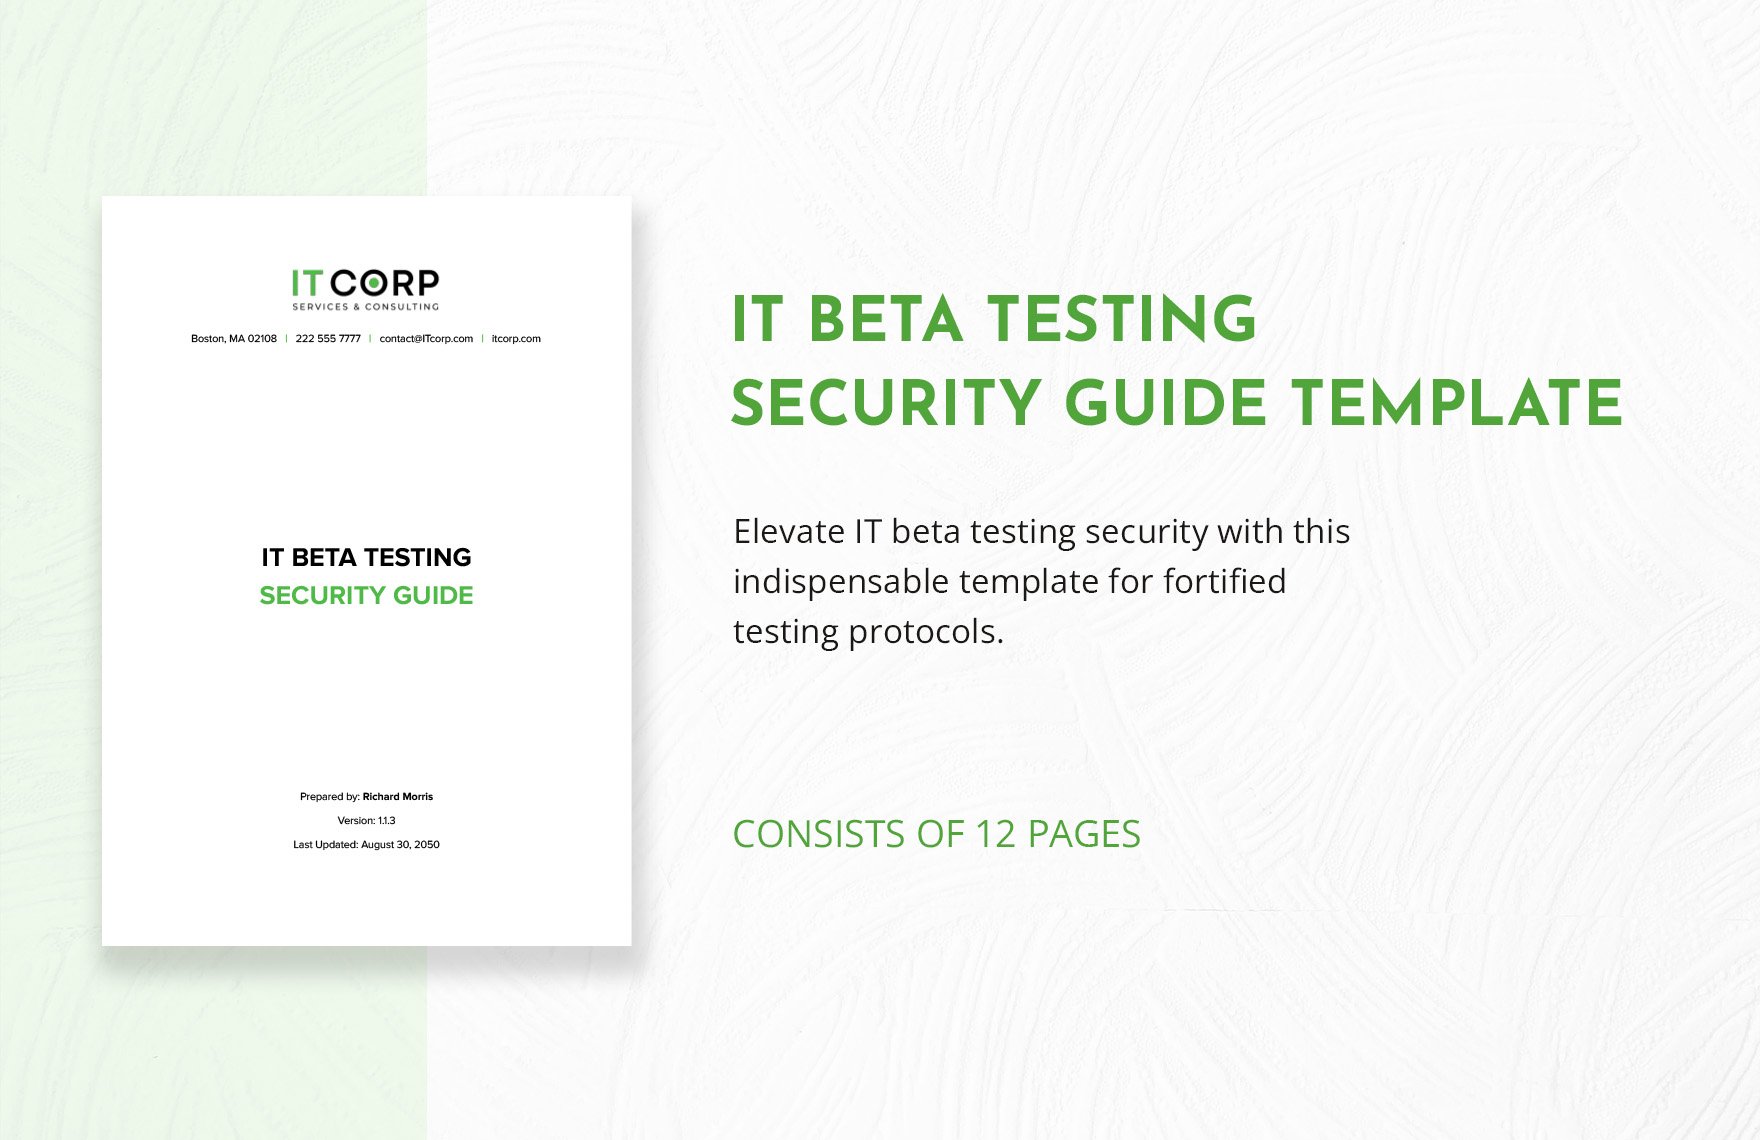 IT Beta Testing Security Guide Template